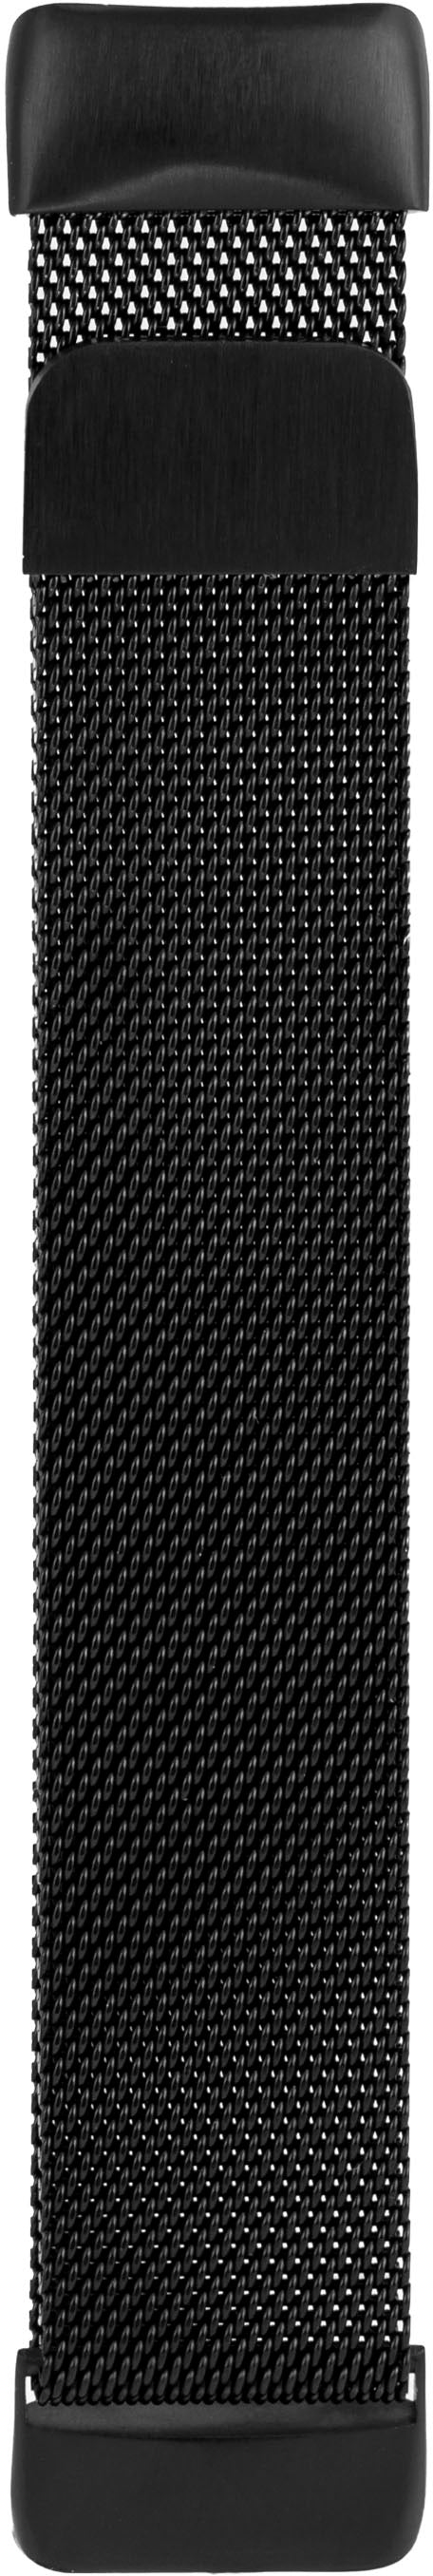 WITHit - Fitbit Charge 5 3-pack (black mesh, bluestone sport and black woven) - Woven Black/Bluestone/Black_5